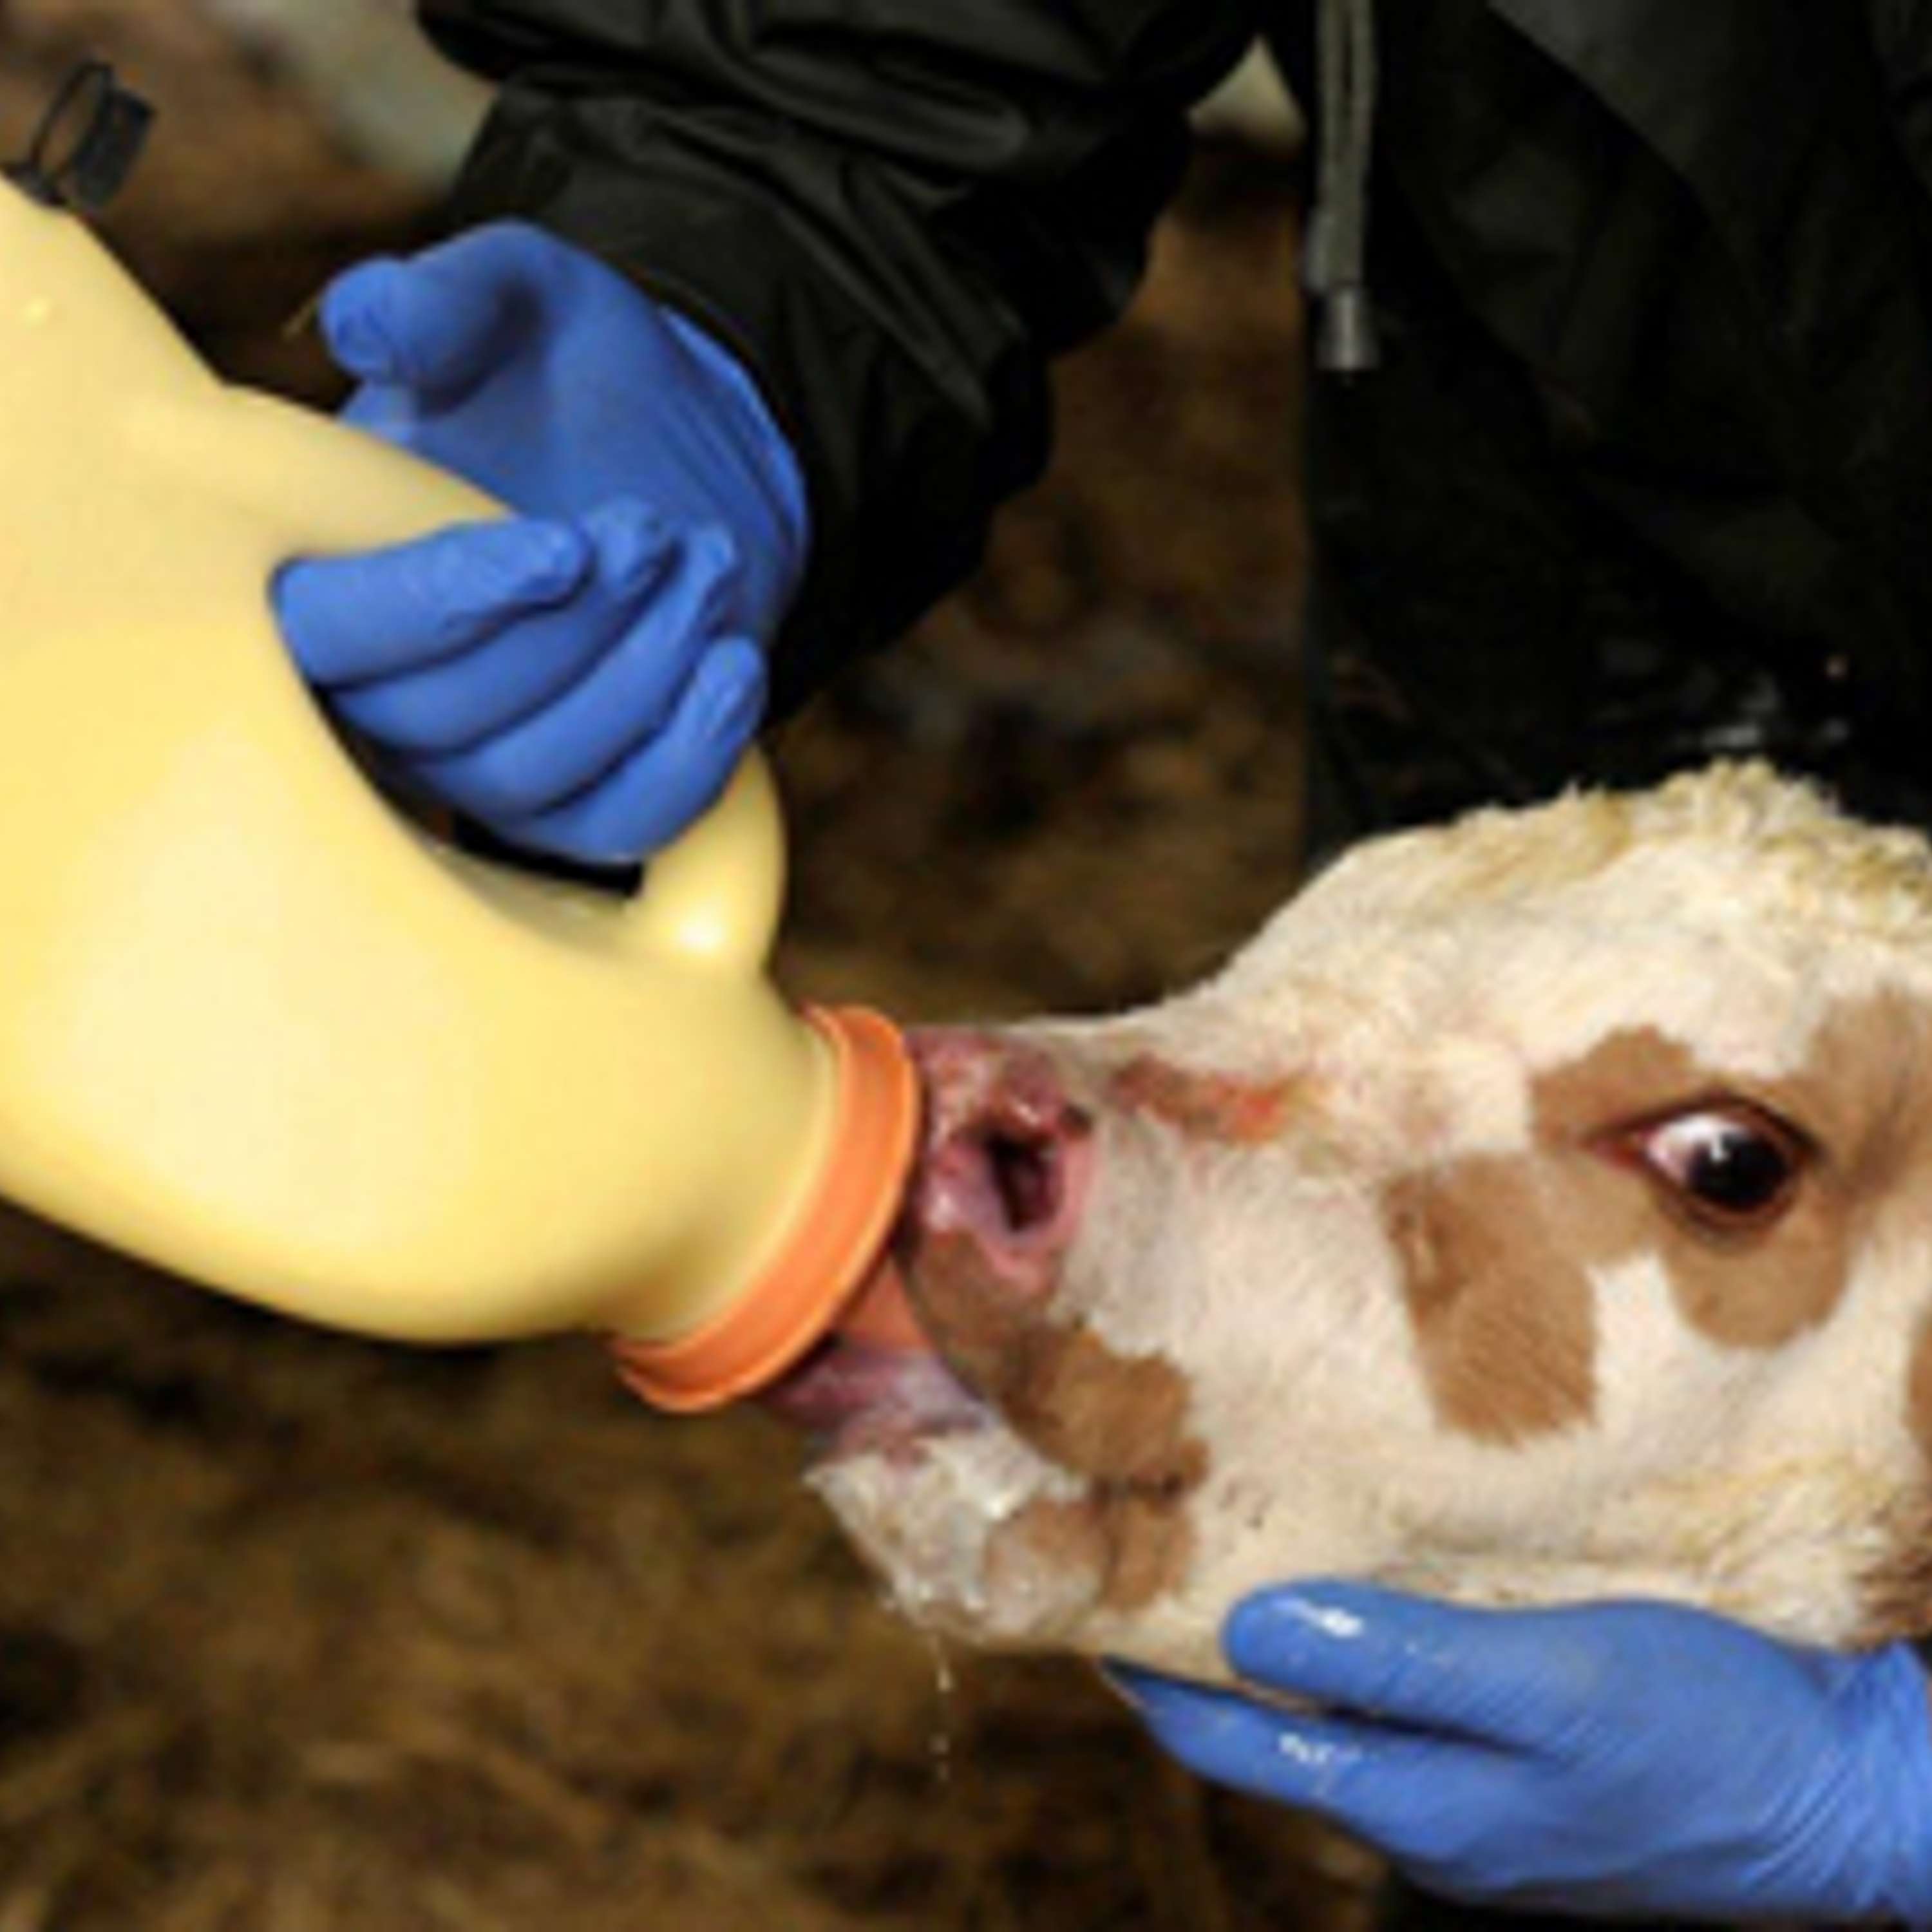 Advice and tips for caring for the new born calf